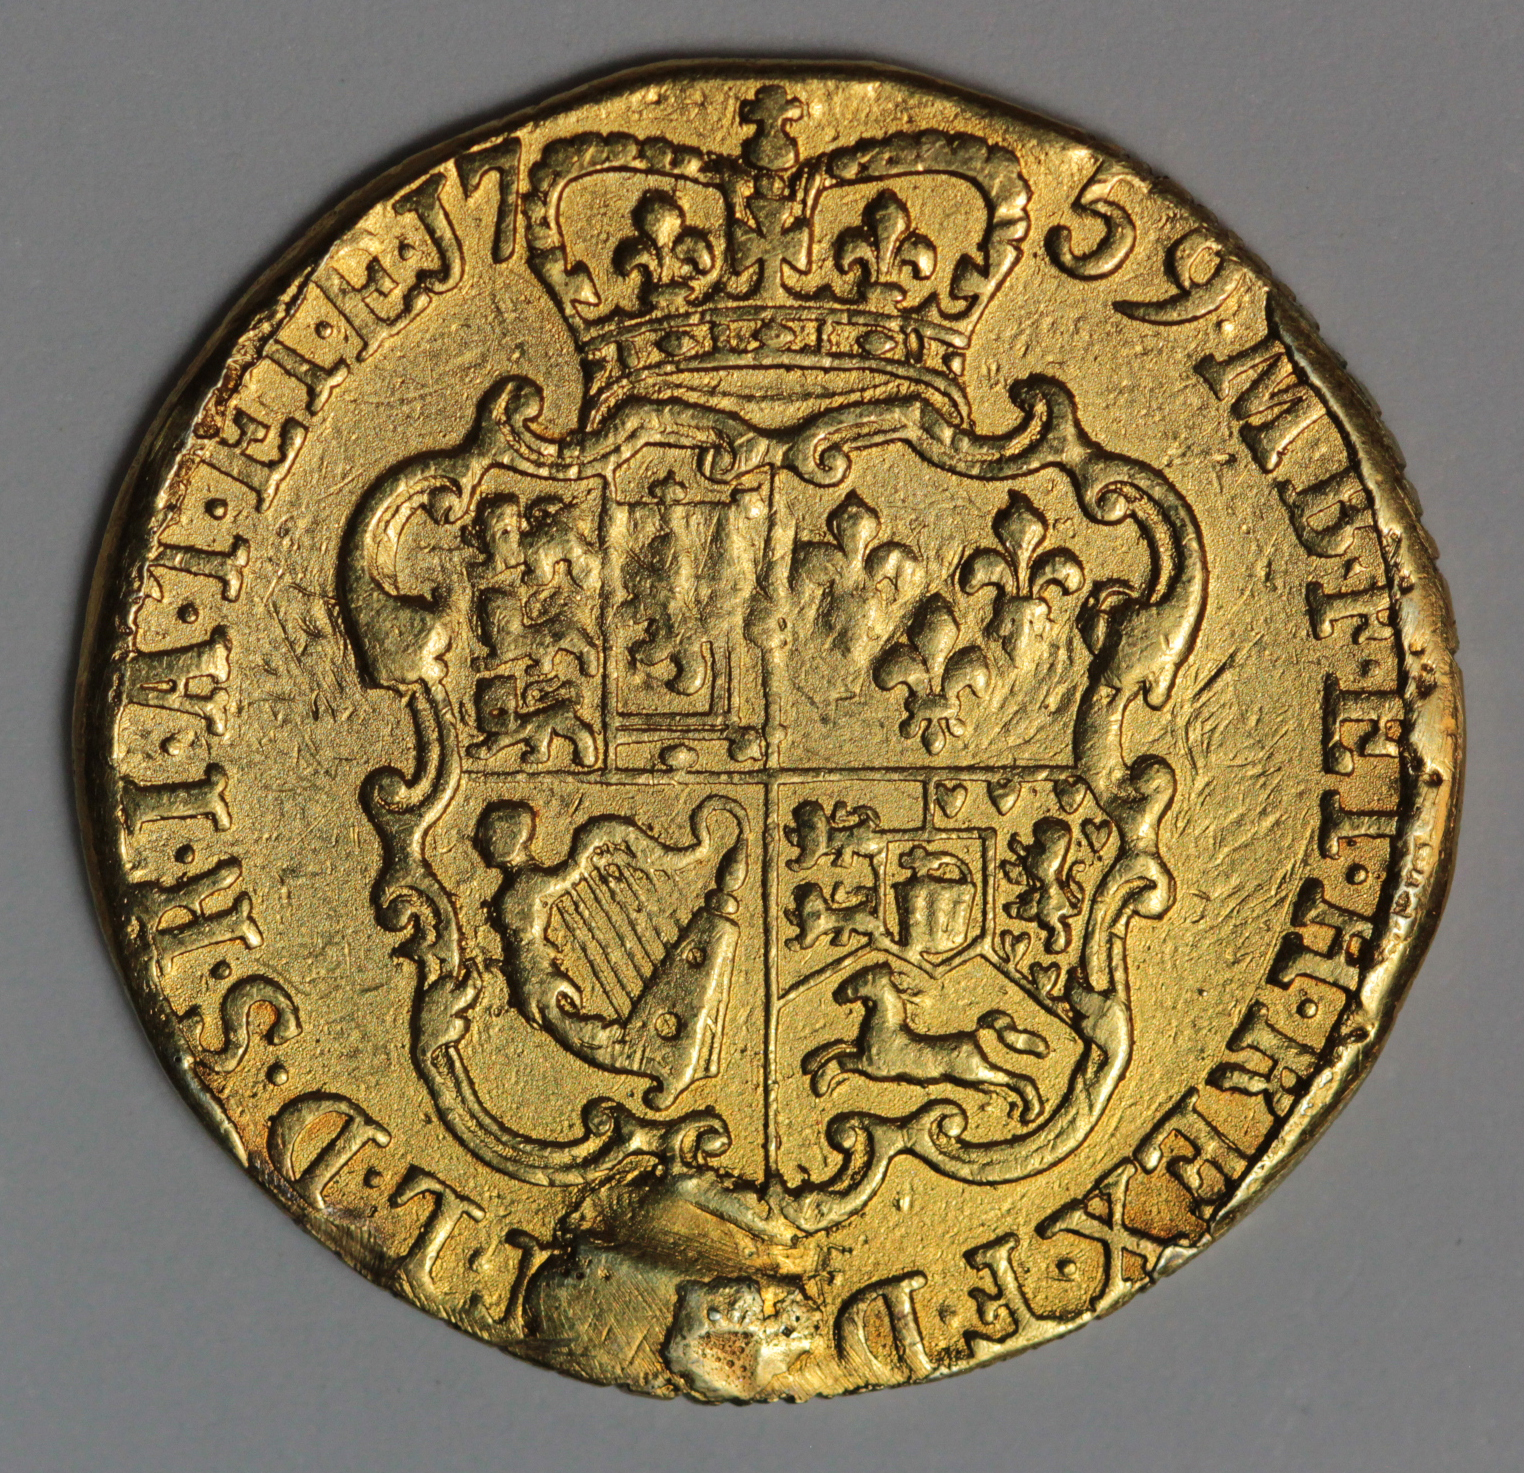 Guinea 1759 cleaned ex jewellery, ideal space filler - Image 2 of 2